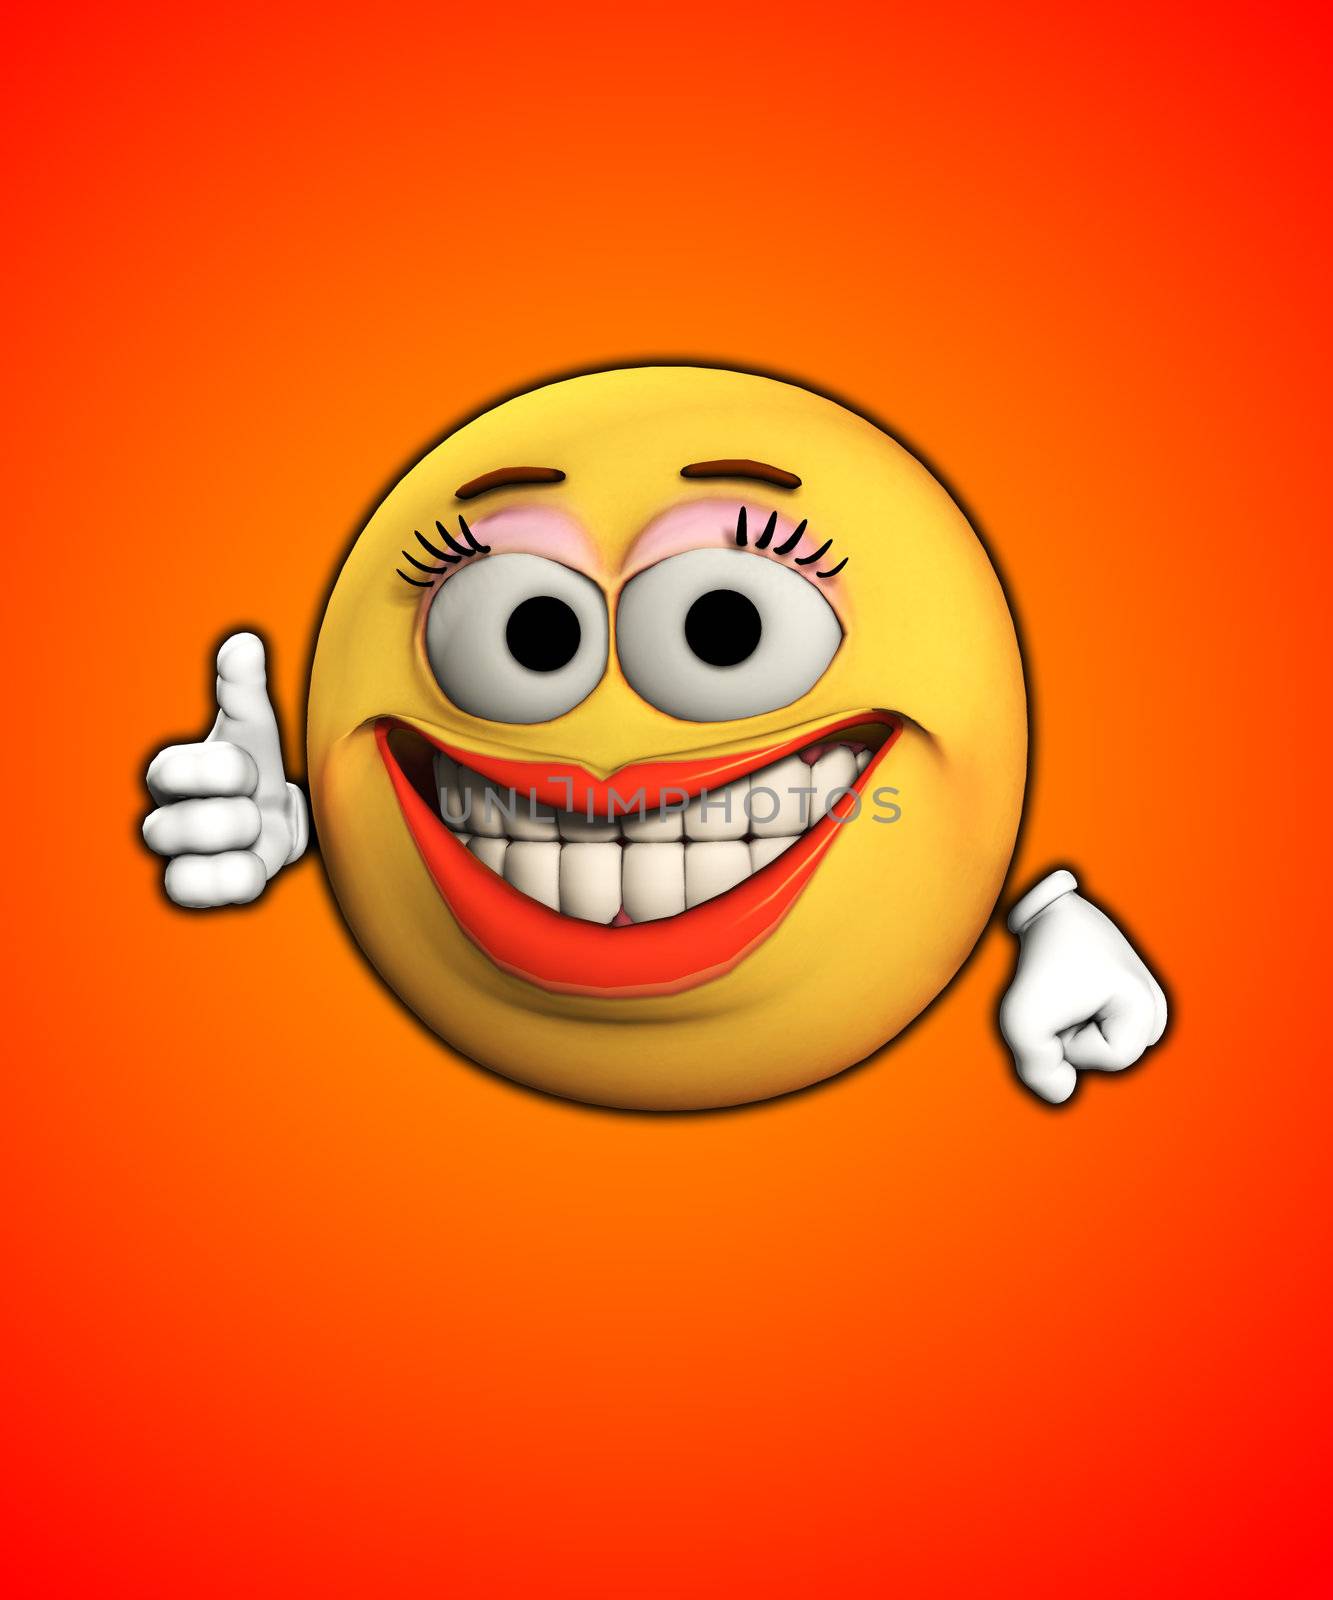 Female cartoon face indicating she is happy.